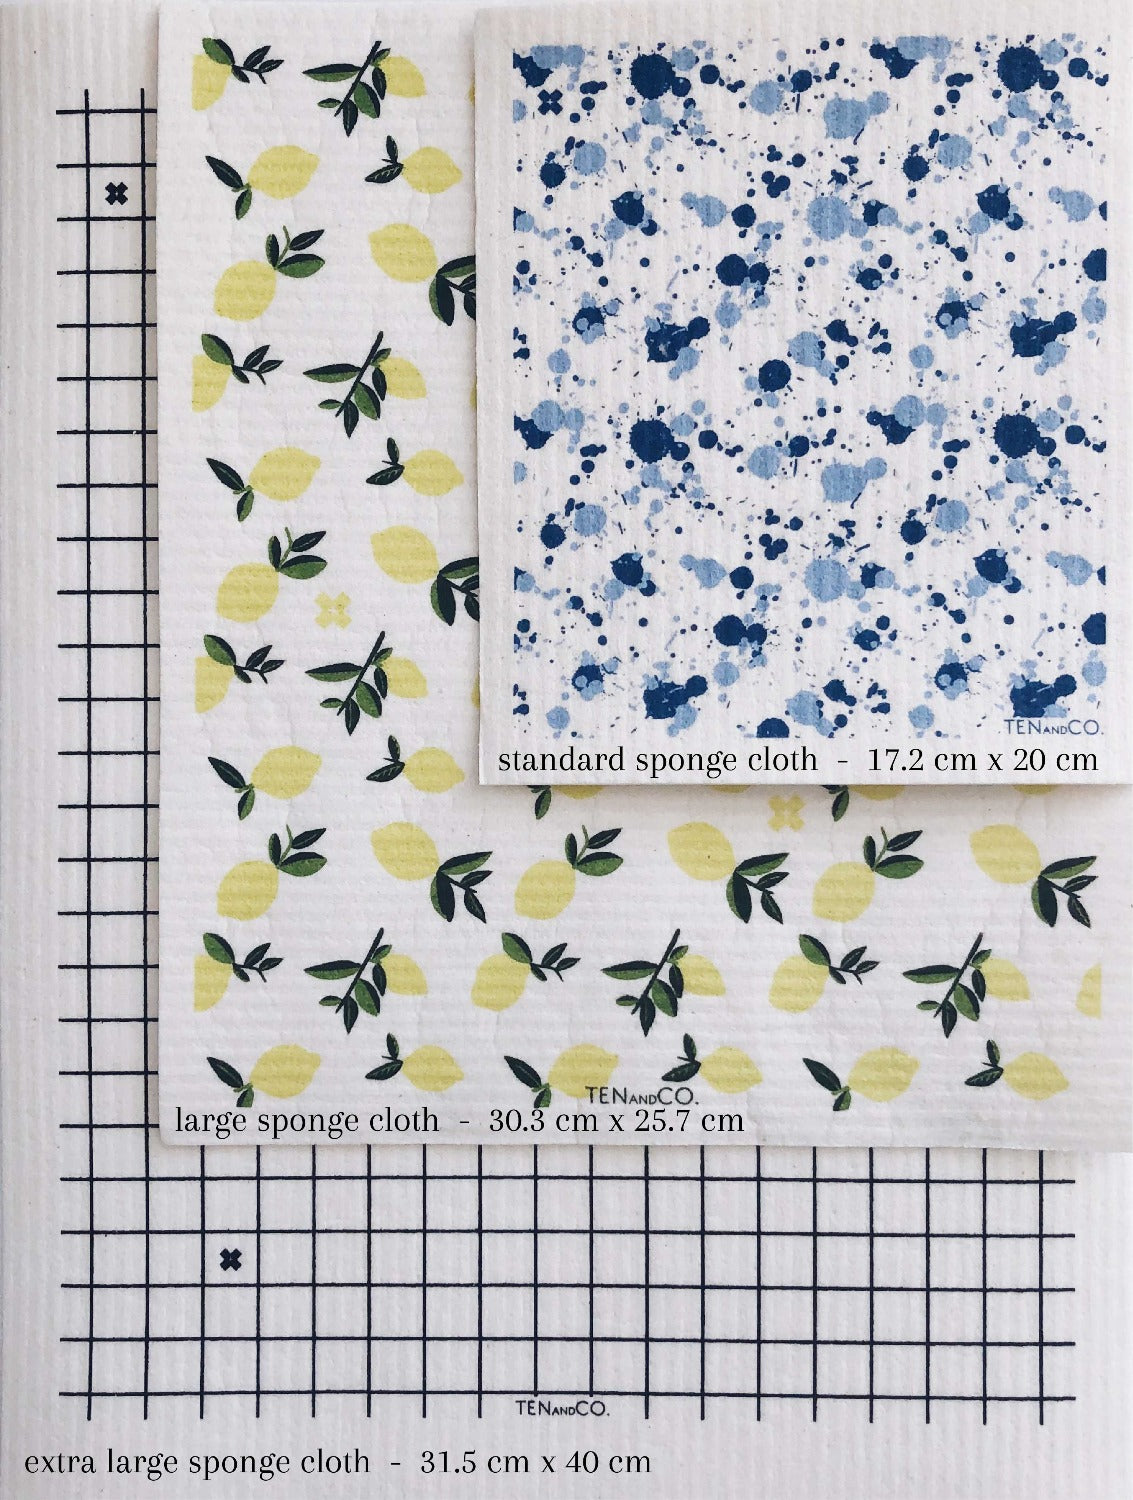 Flat lay image of sponge cloth sizes. There are 3 different sized sponge cloths laying on top of each other. On the bottom is an XL grid sponge cloth. On top of that is a large Citrus Lemon sponge cloth and then on top of that is a standard Splatter Blues sponge cloth.